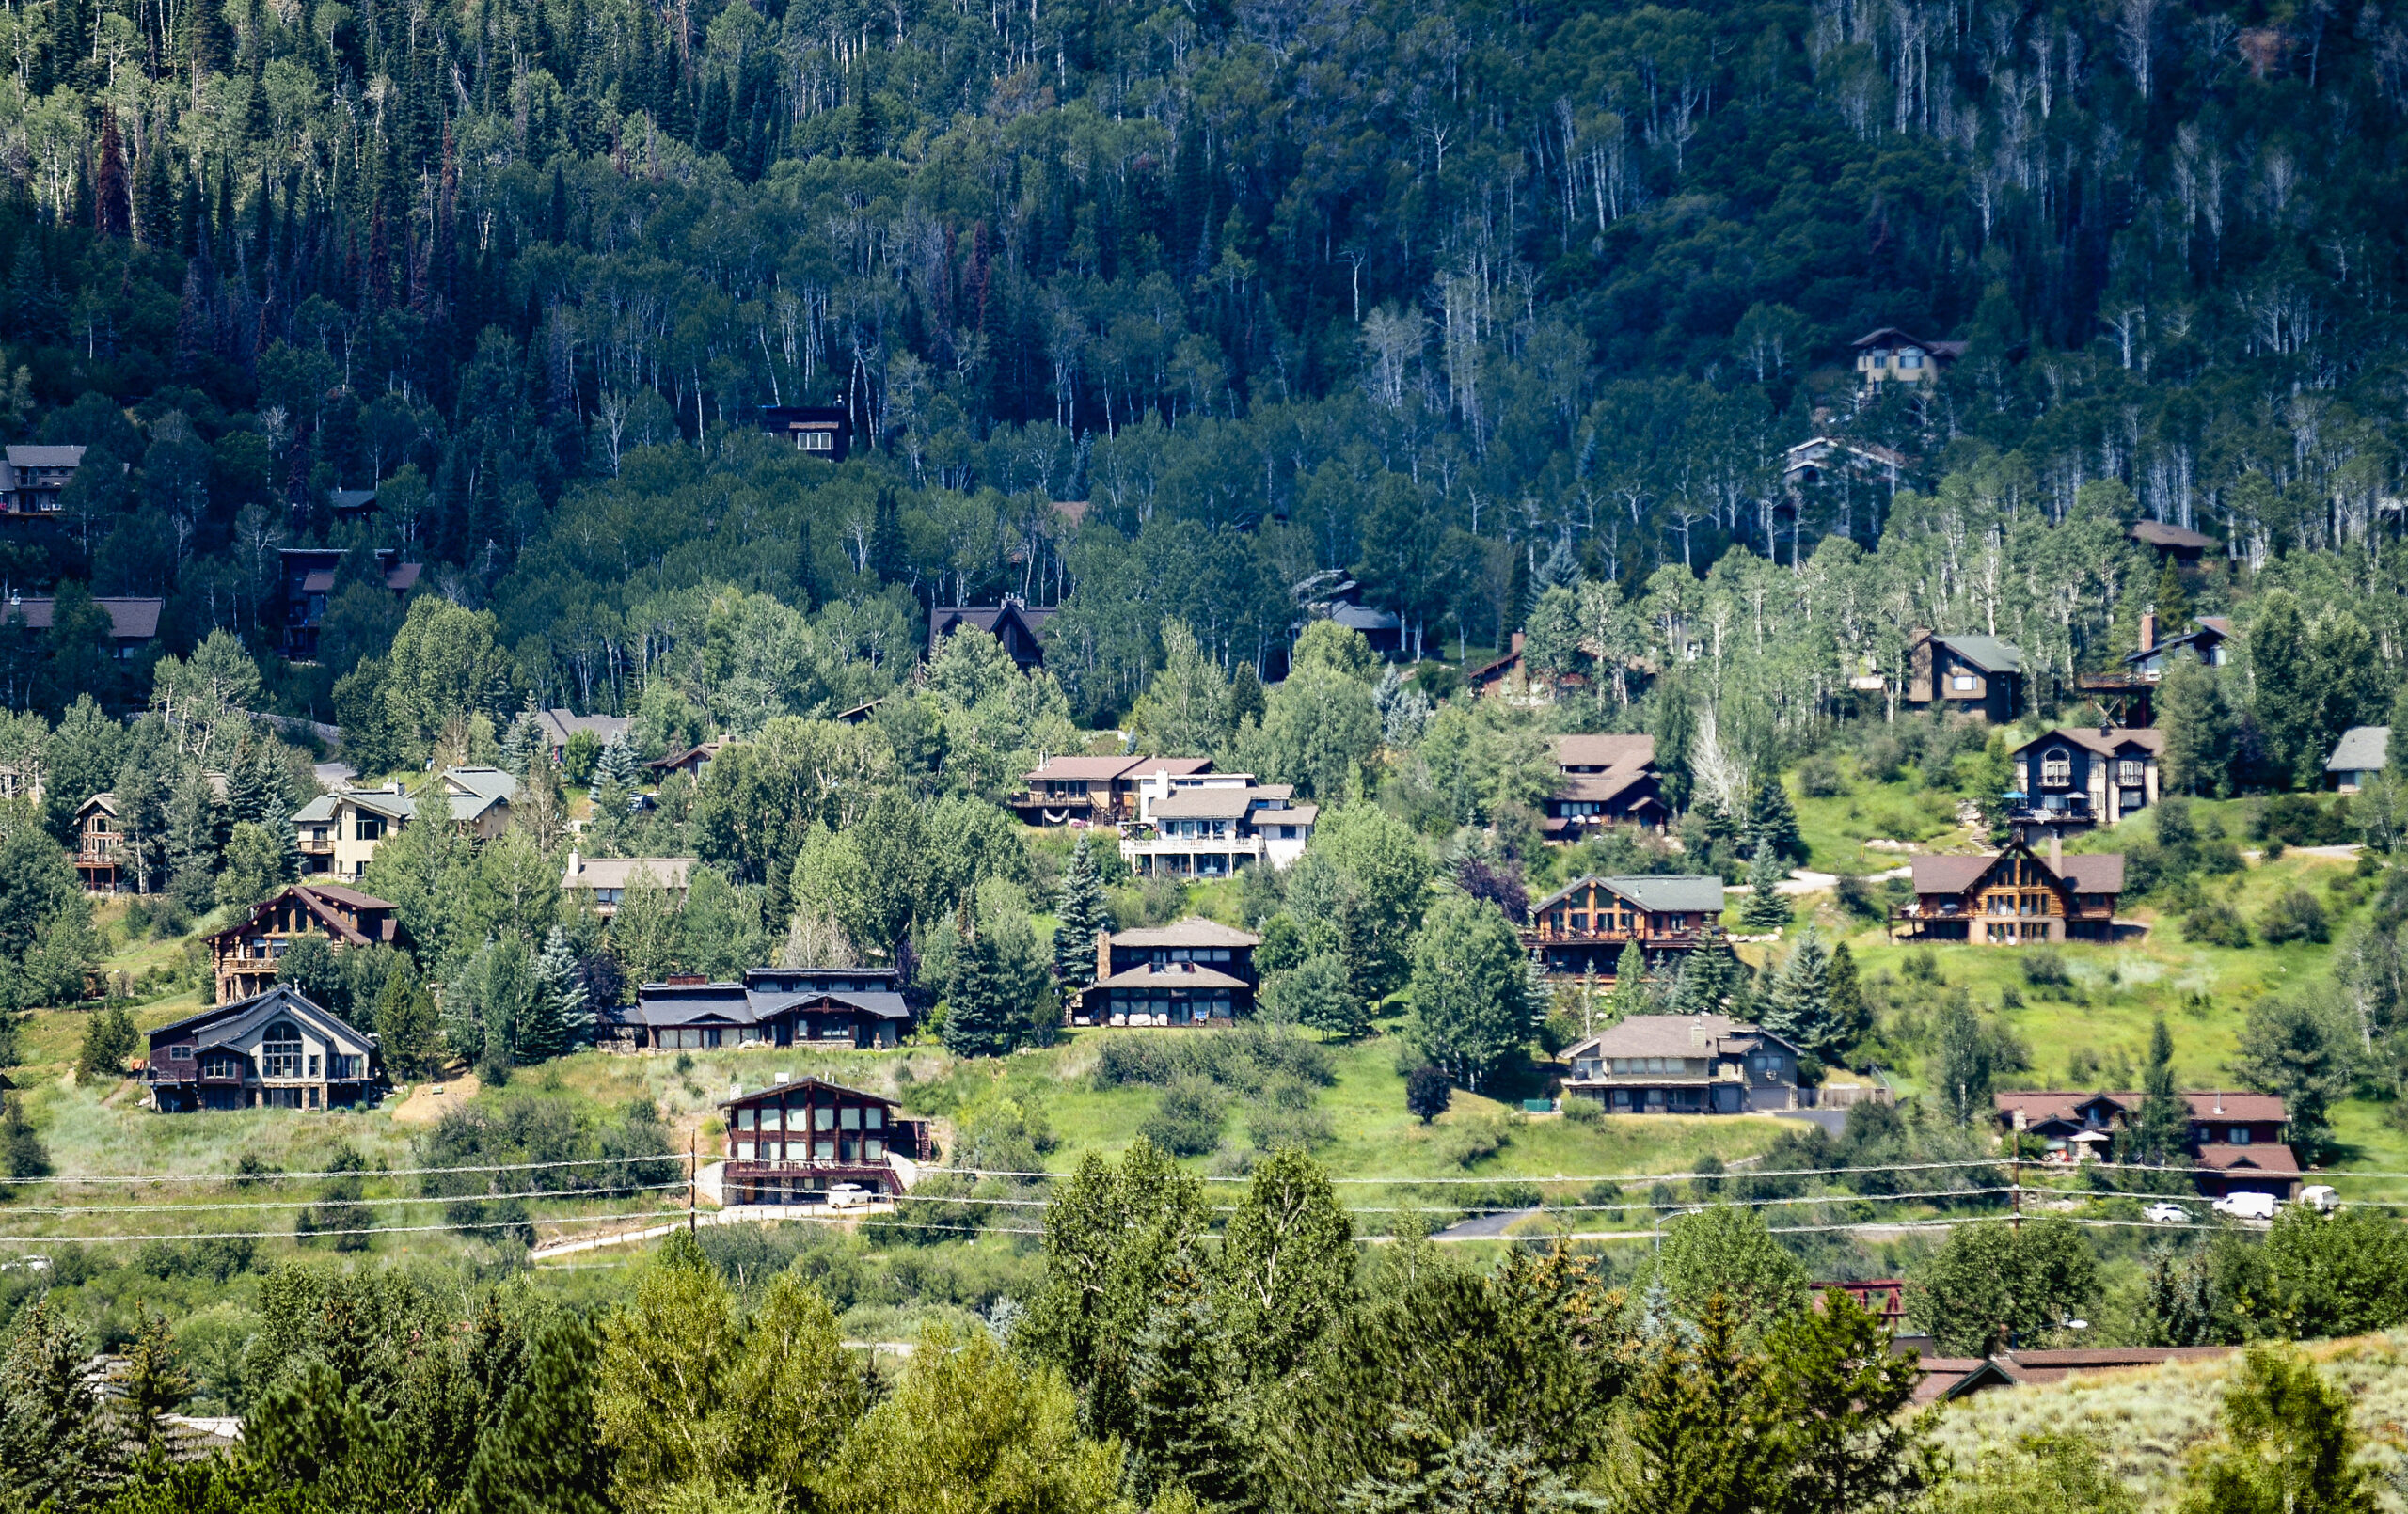 An overhead picture shows several houses on a wooded hillside.